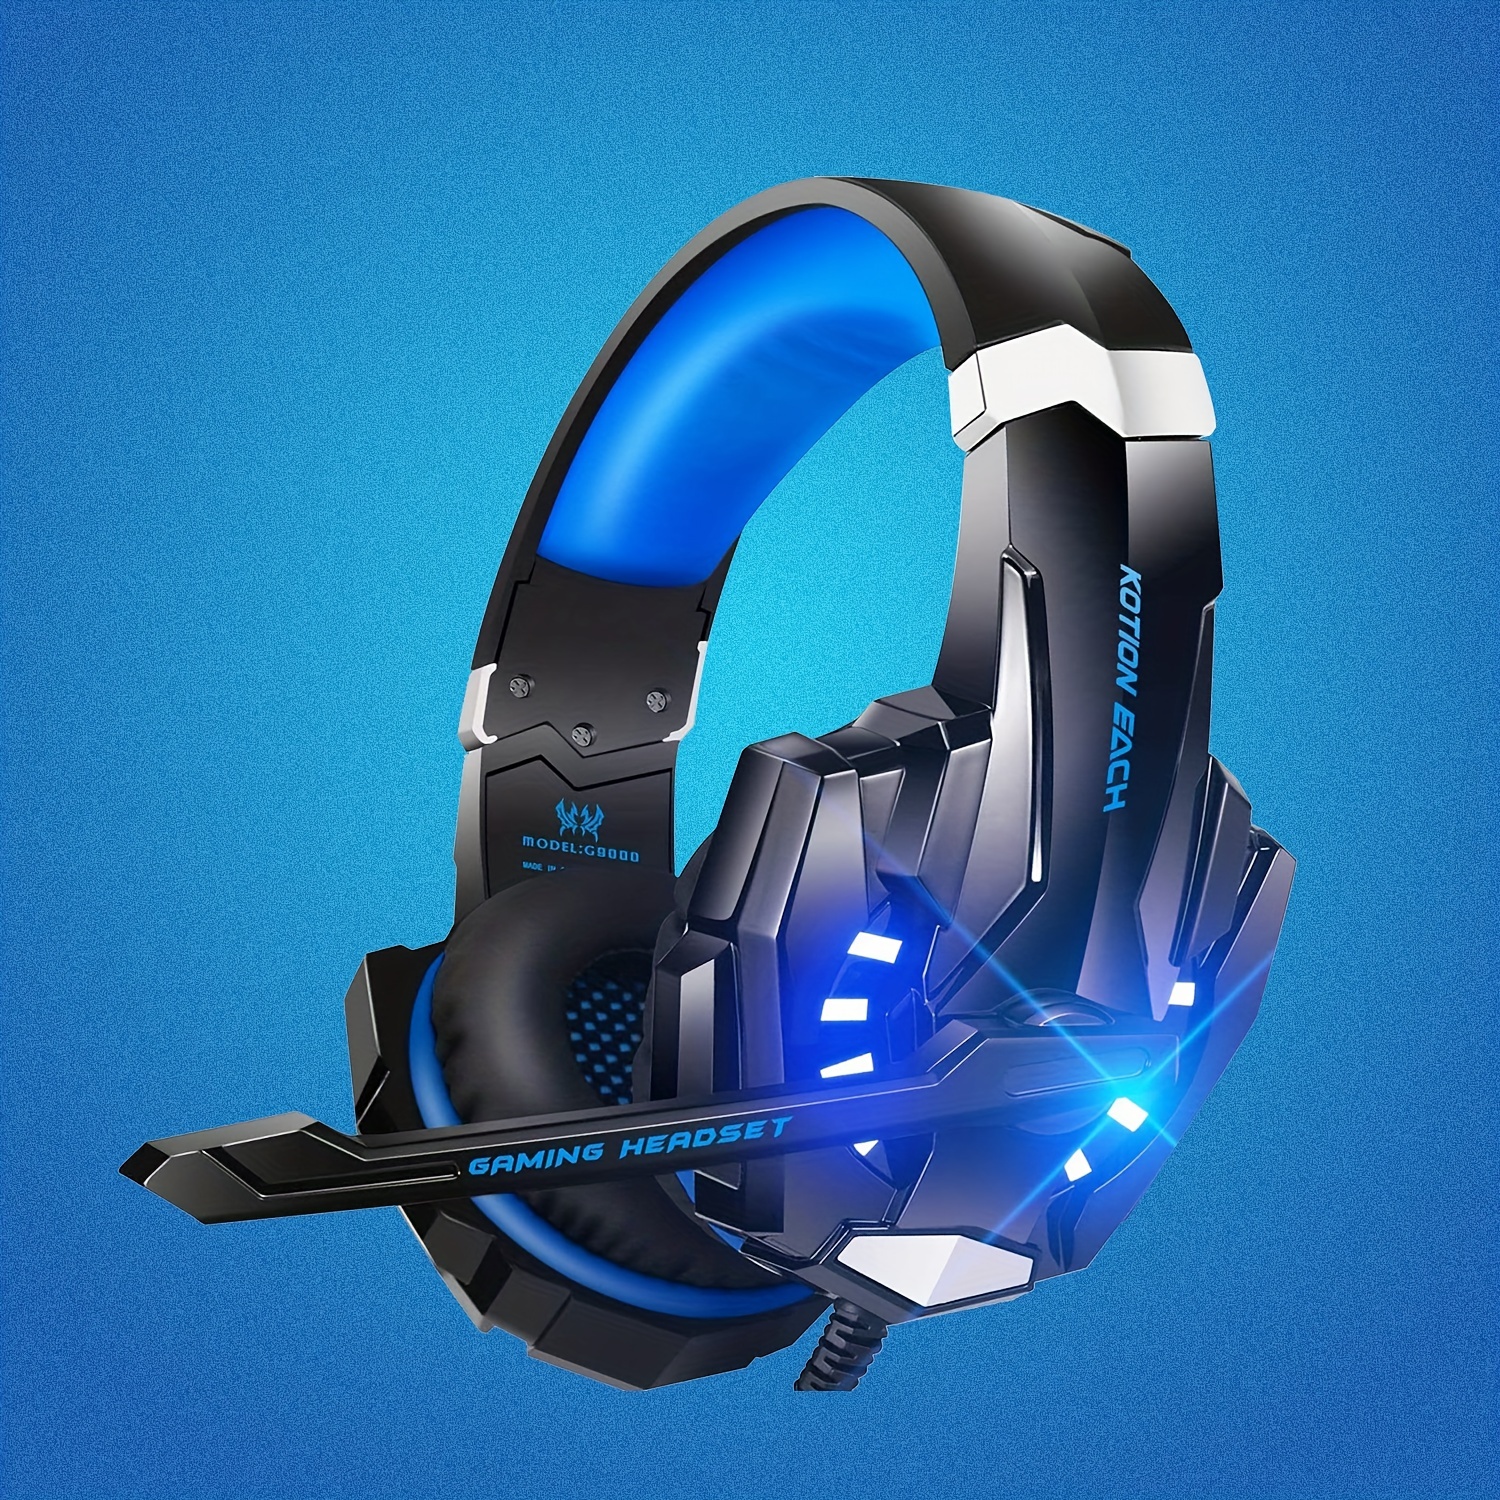 

G9000 Stereo Gaming Headset For Ps4 Pc 1 For Ps5 Controller, Noise Cancelling Over Ear Headphones With Mic, Led Light, Bass Surround, Soft Memory Earmuffs For Laptop Nes Games